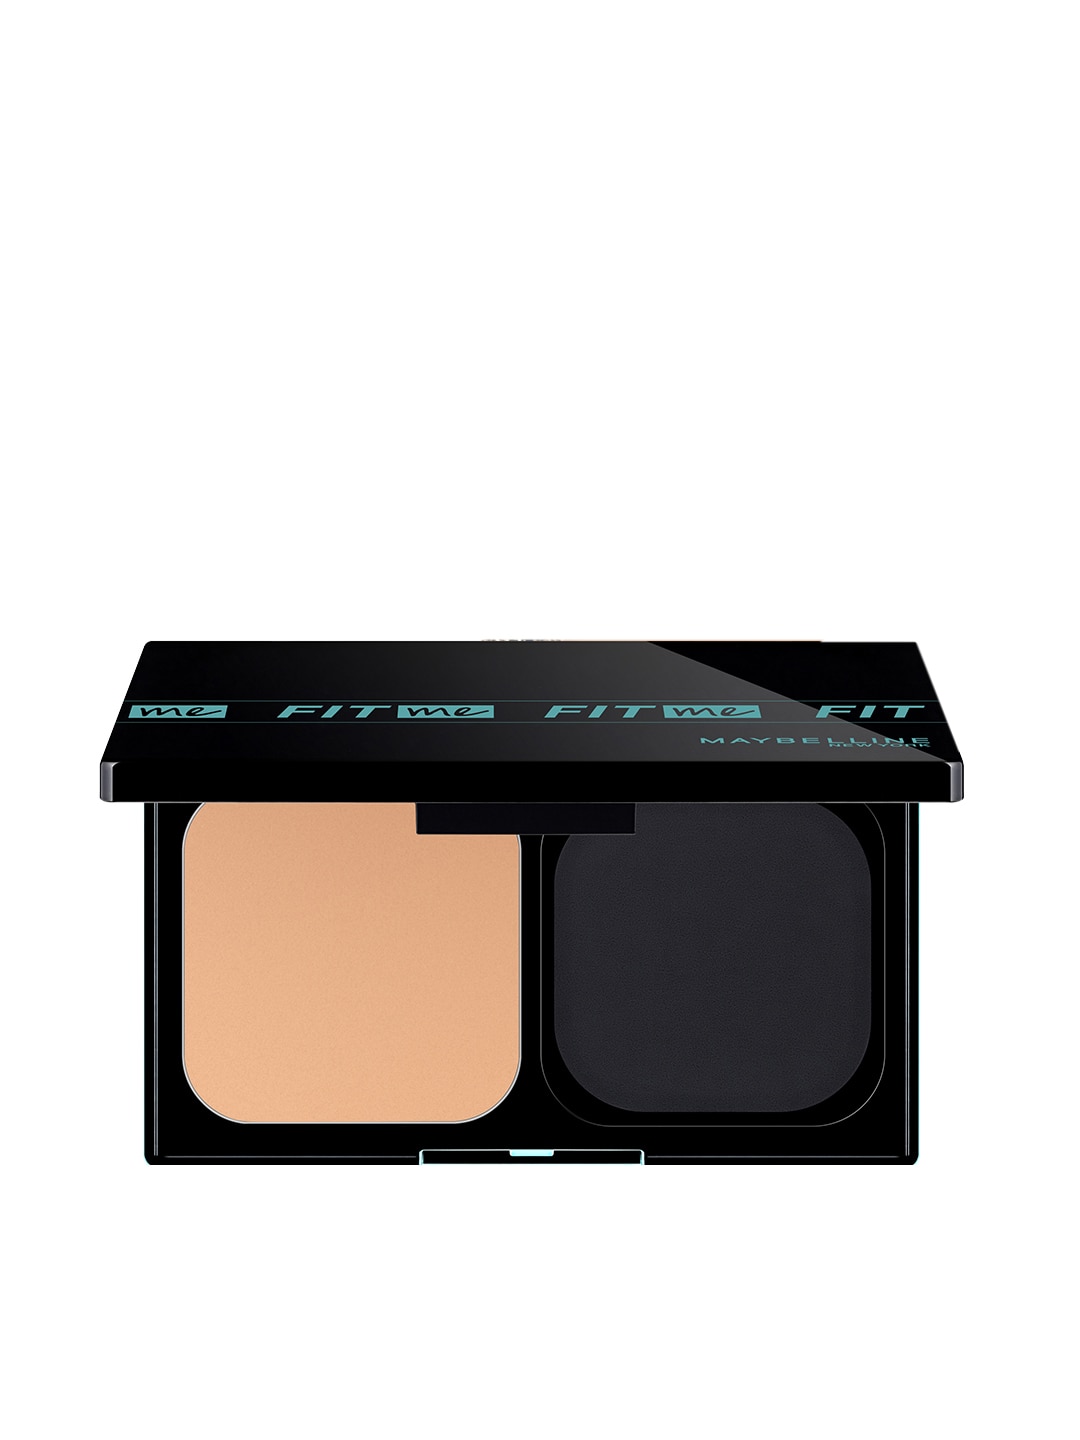 Maybelline New York Fit Me SPF 44 Ultimate Powder Foundation - Shade 230 Price in India